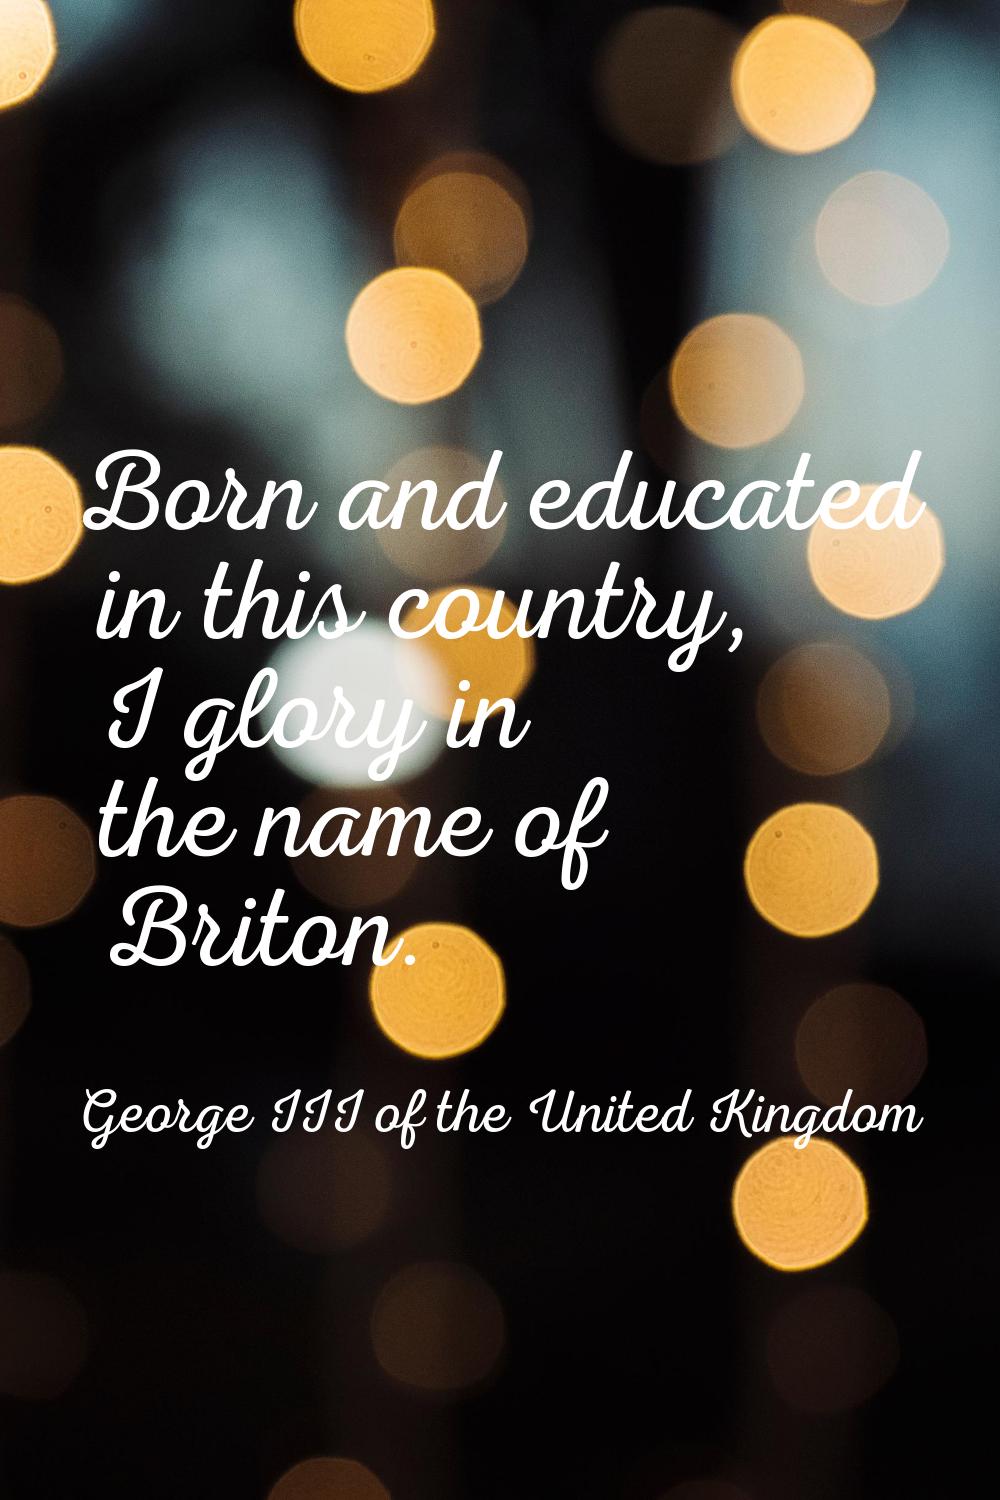 Born and educated in this country, I glory in the name of Briton.